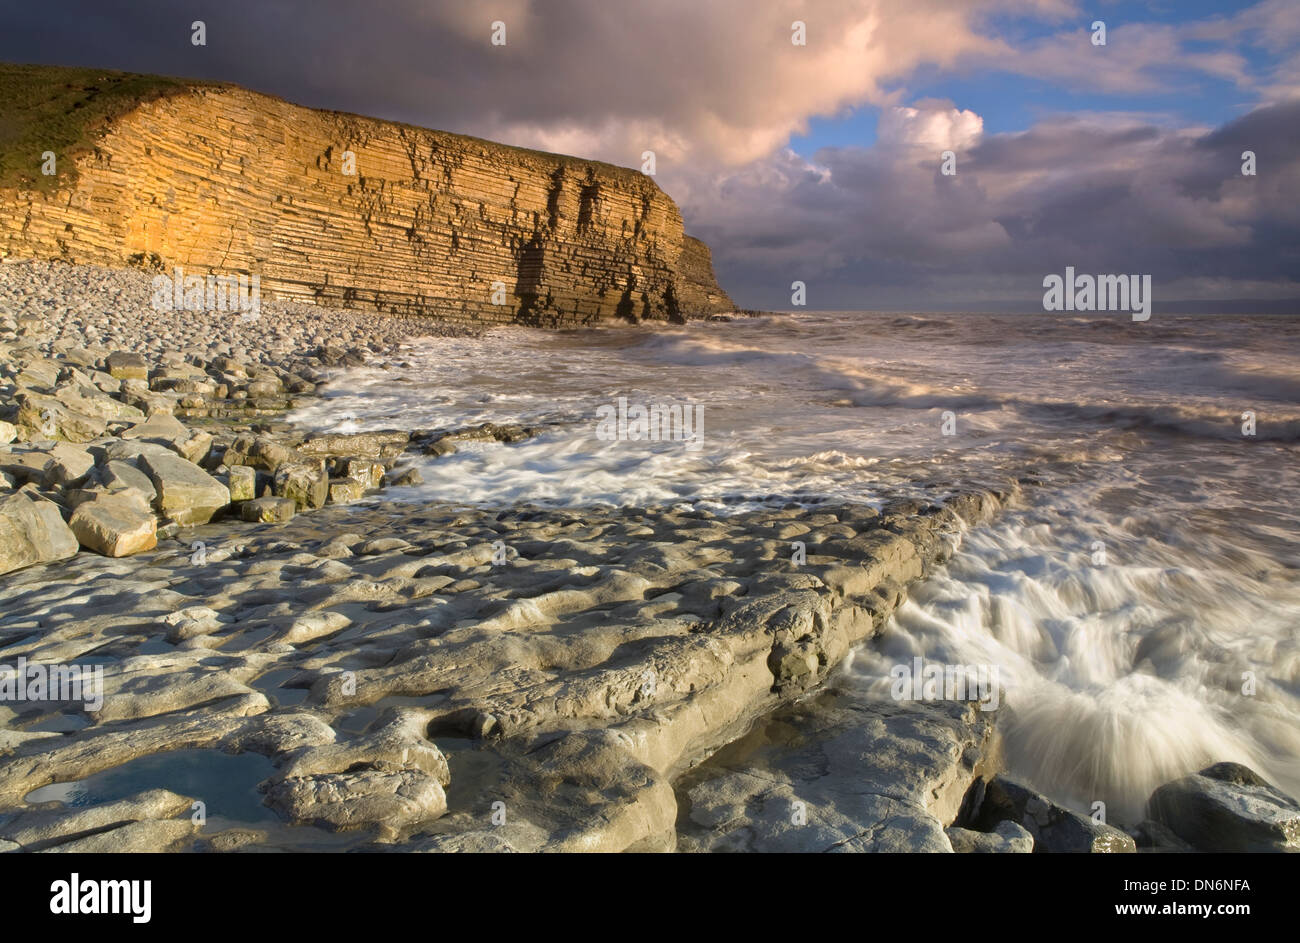 Strong sunlight lights up the cliffs at Nash Point, Vale of Glamorgan at sunset as the tide rolls in Stock Photo